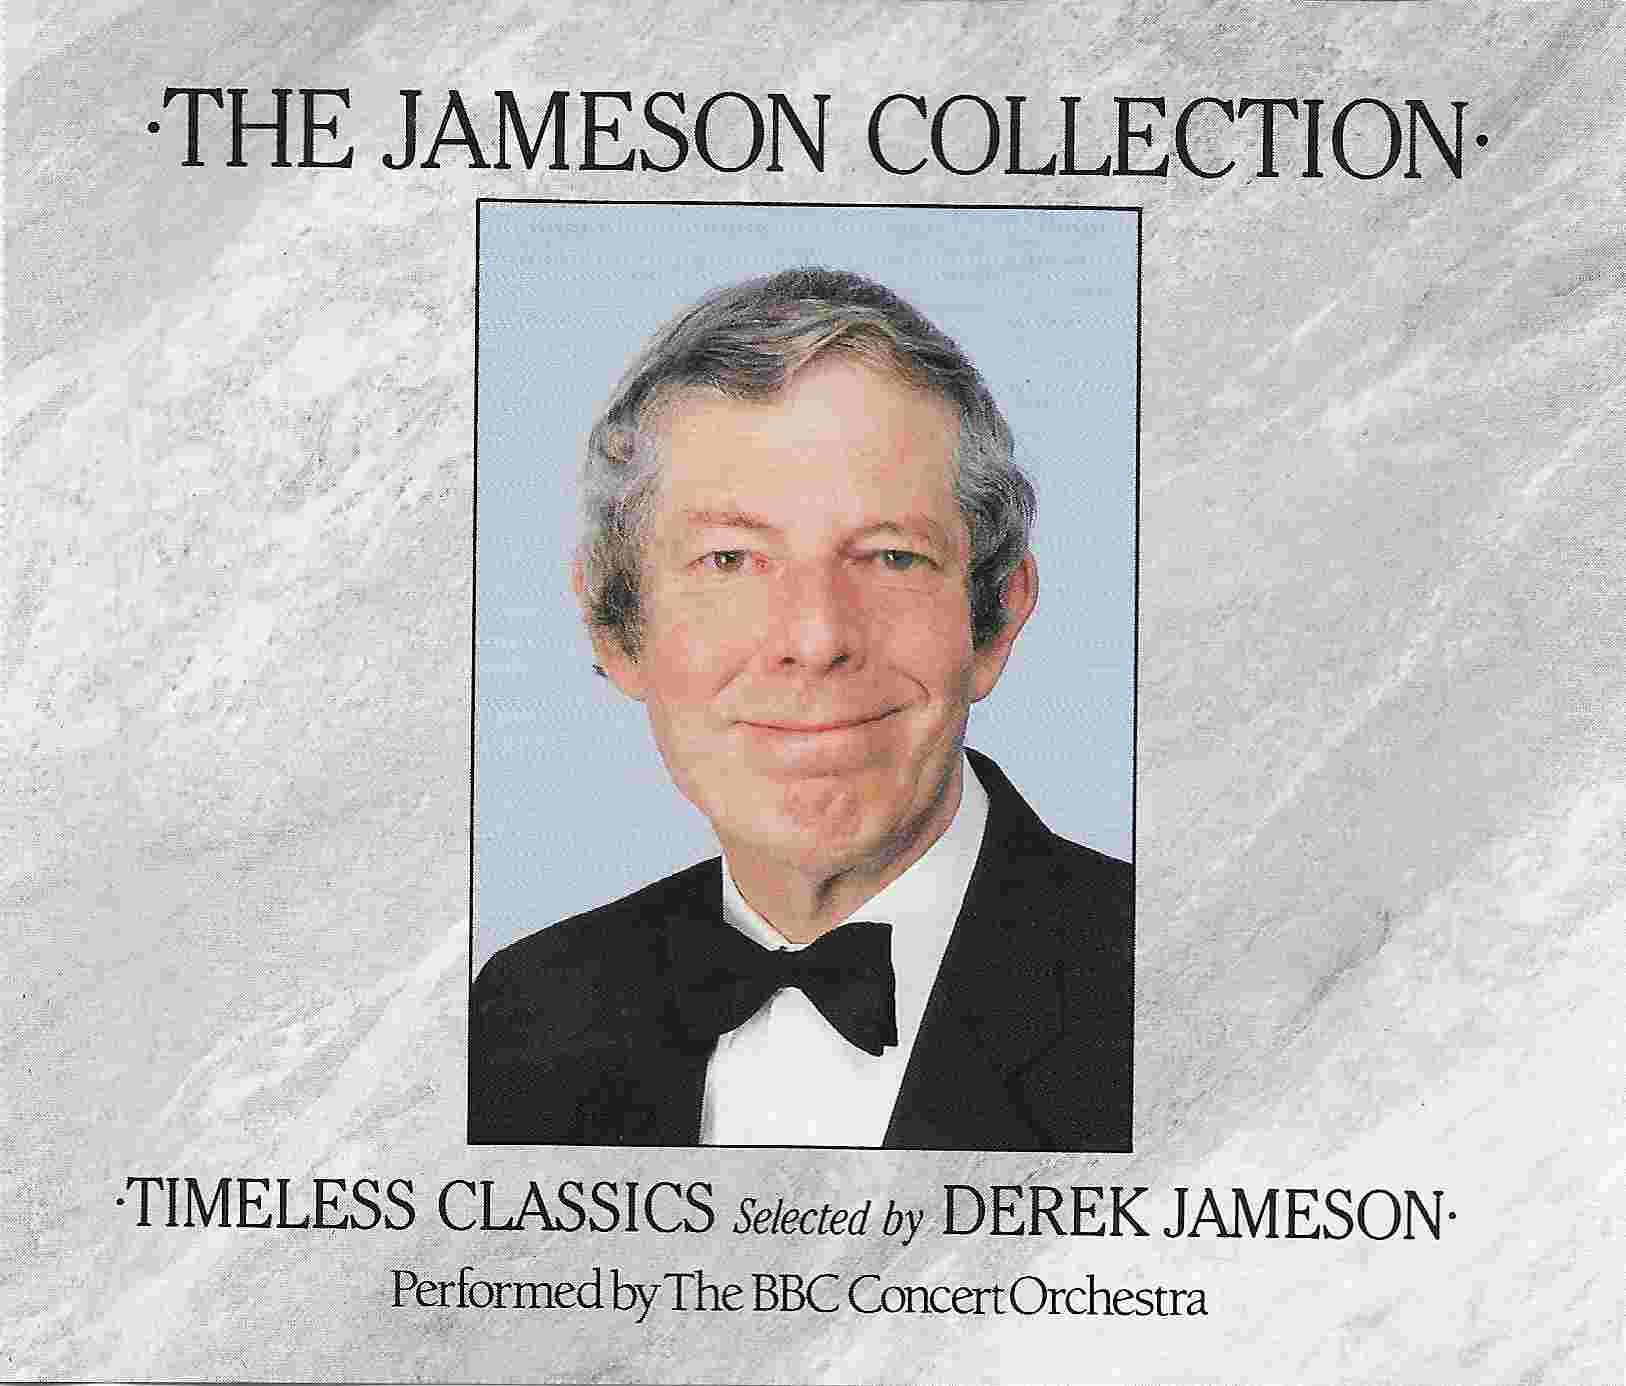 Picture of BBCCD2002 Derek Jameson collection by artist Derek Jameson  from the BBC records and Tapes library